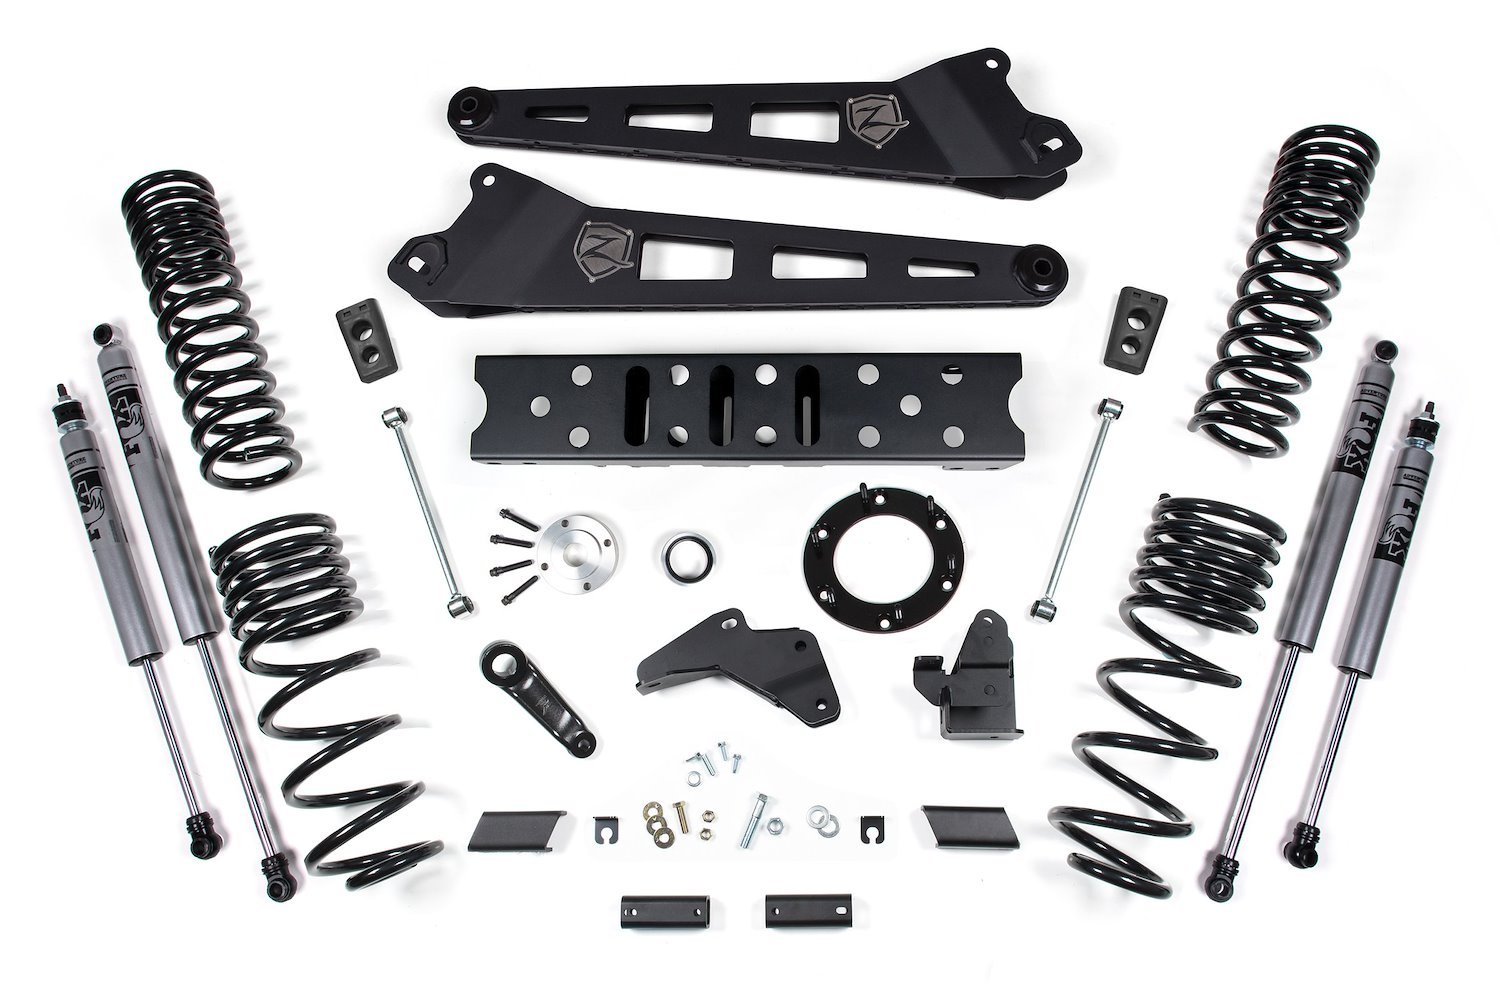 ZOND118F Zone 6.5" Radius Arm Lift Kit - Diesel for Fits Select Ram 2500